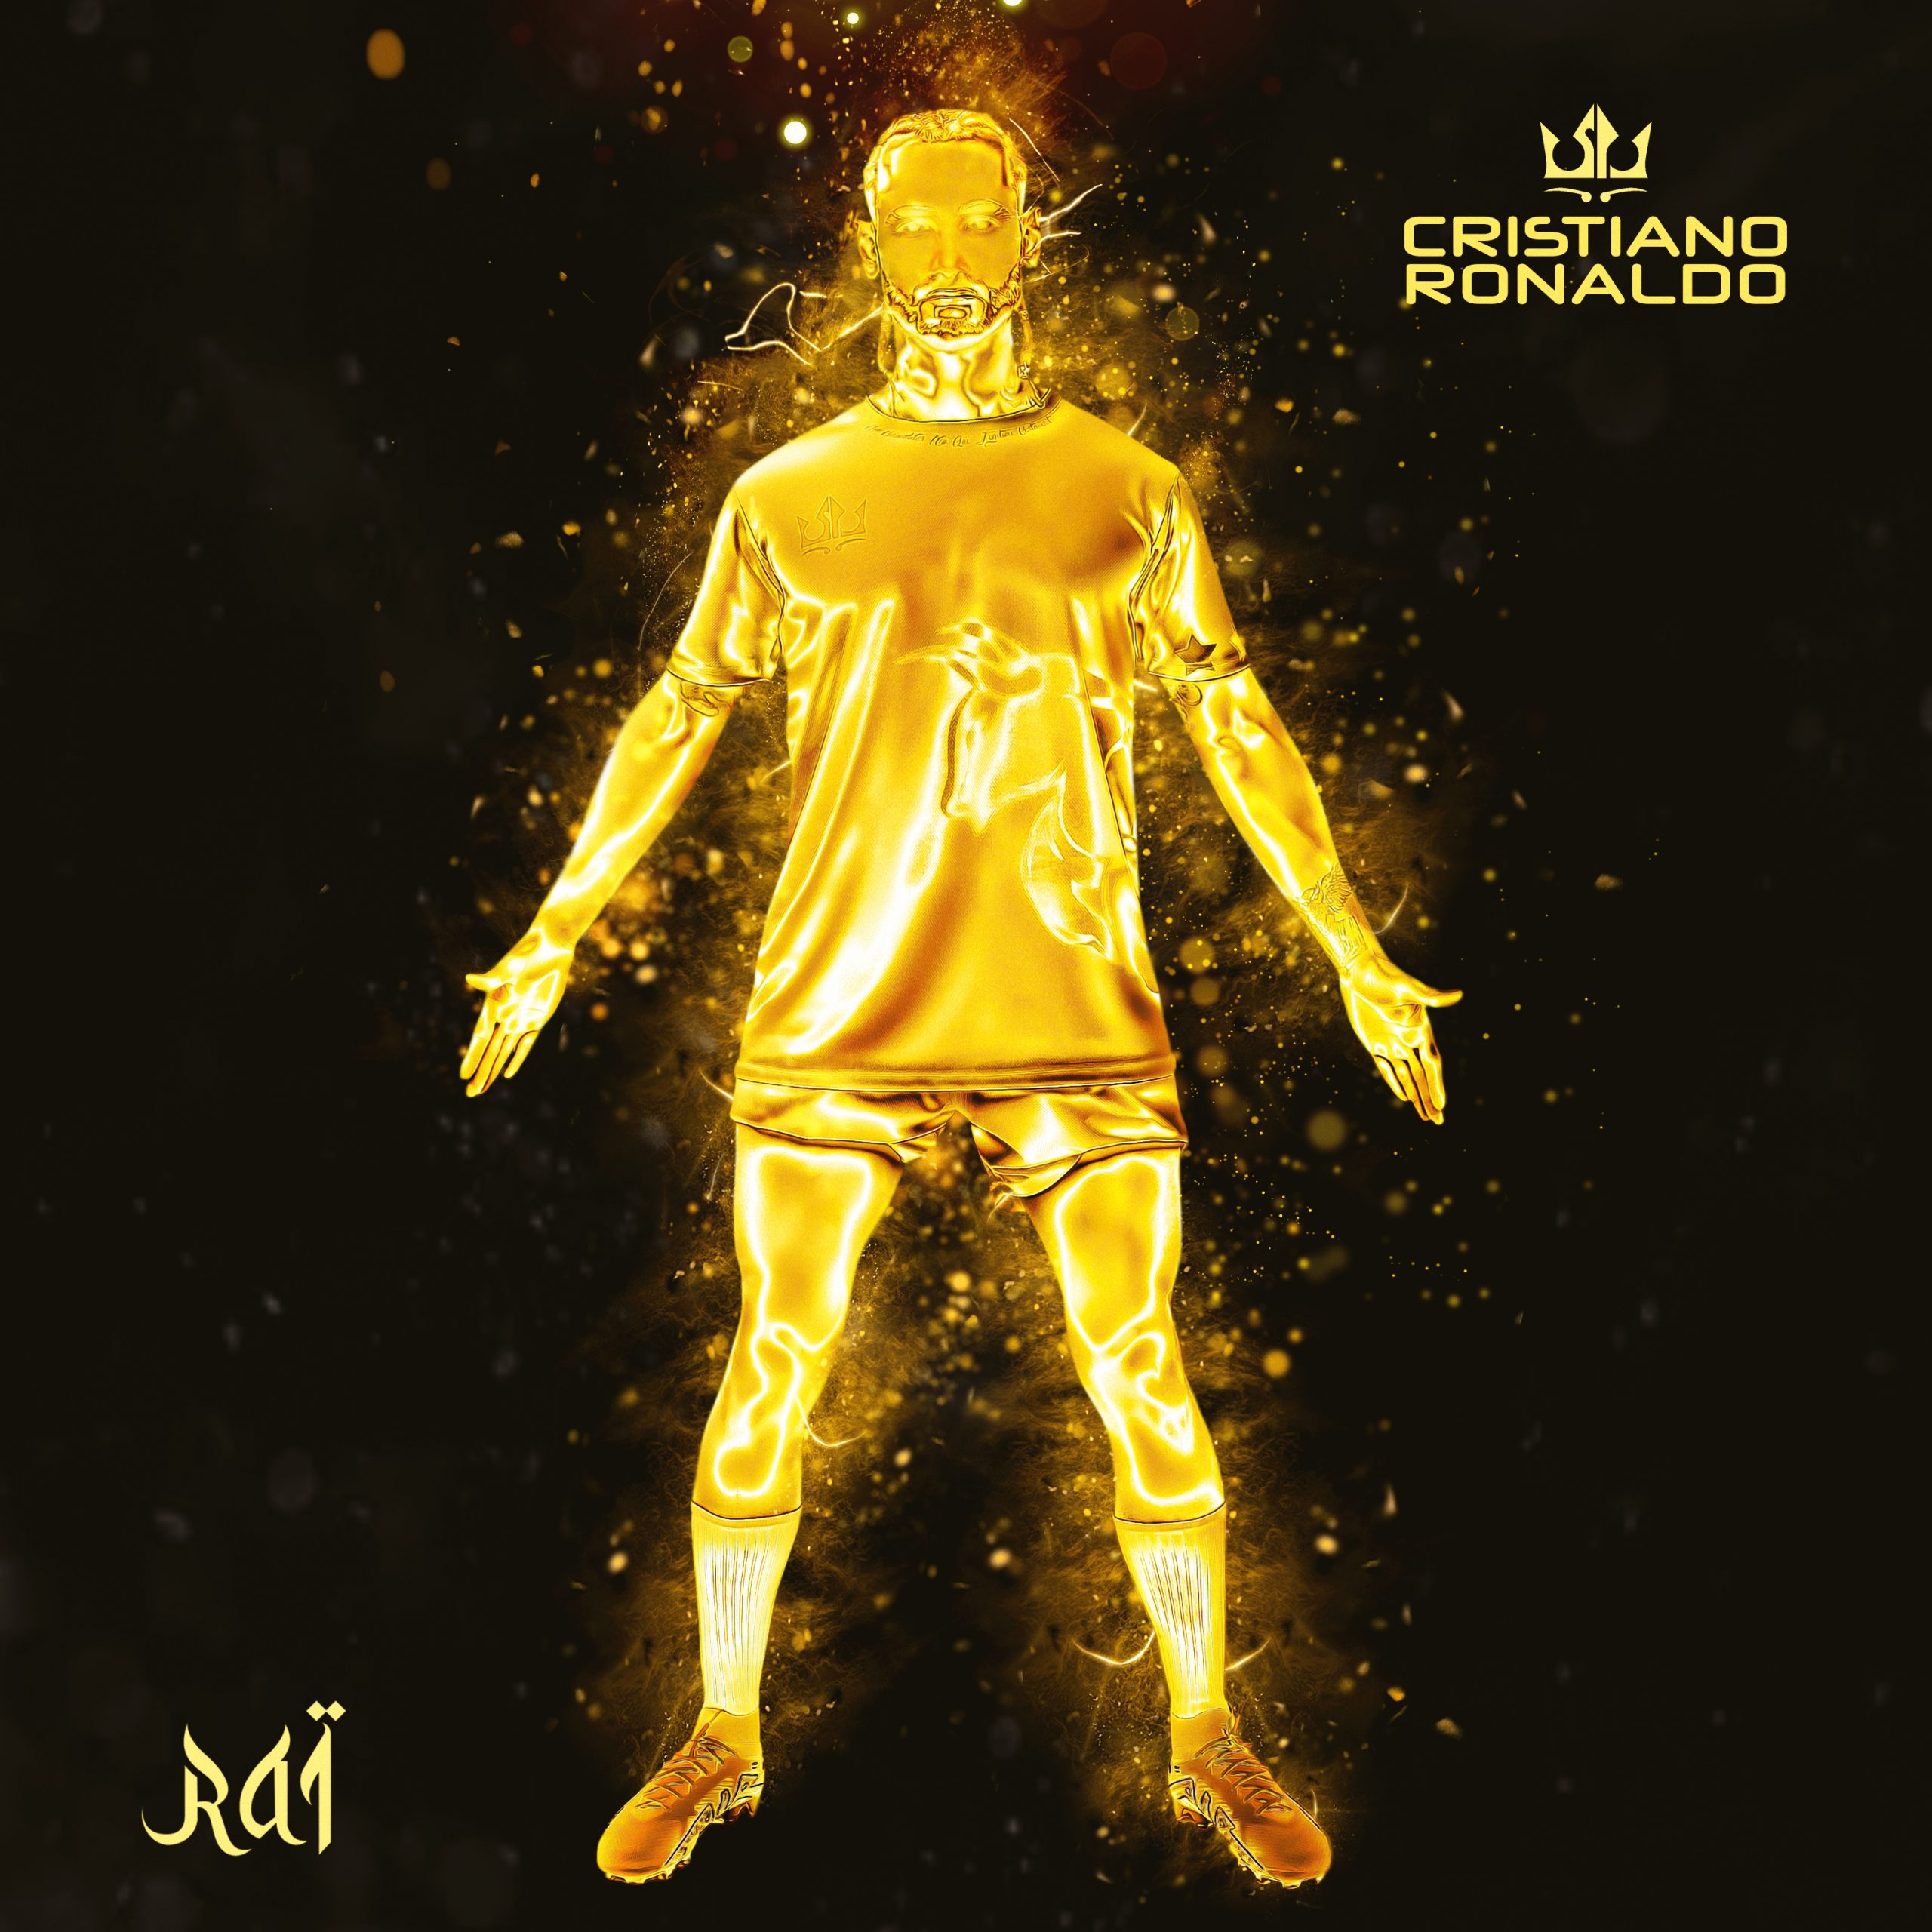 The new single ‘Cristiano Ronaldo’ from ‘RAI’ with its larger-than-life production and massive beats is on the playlist.